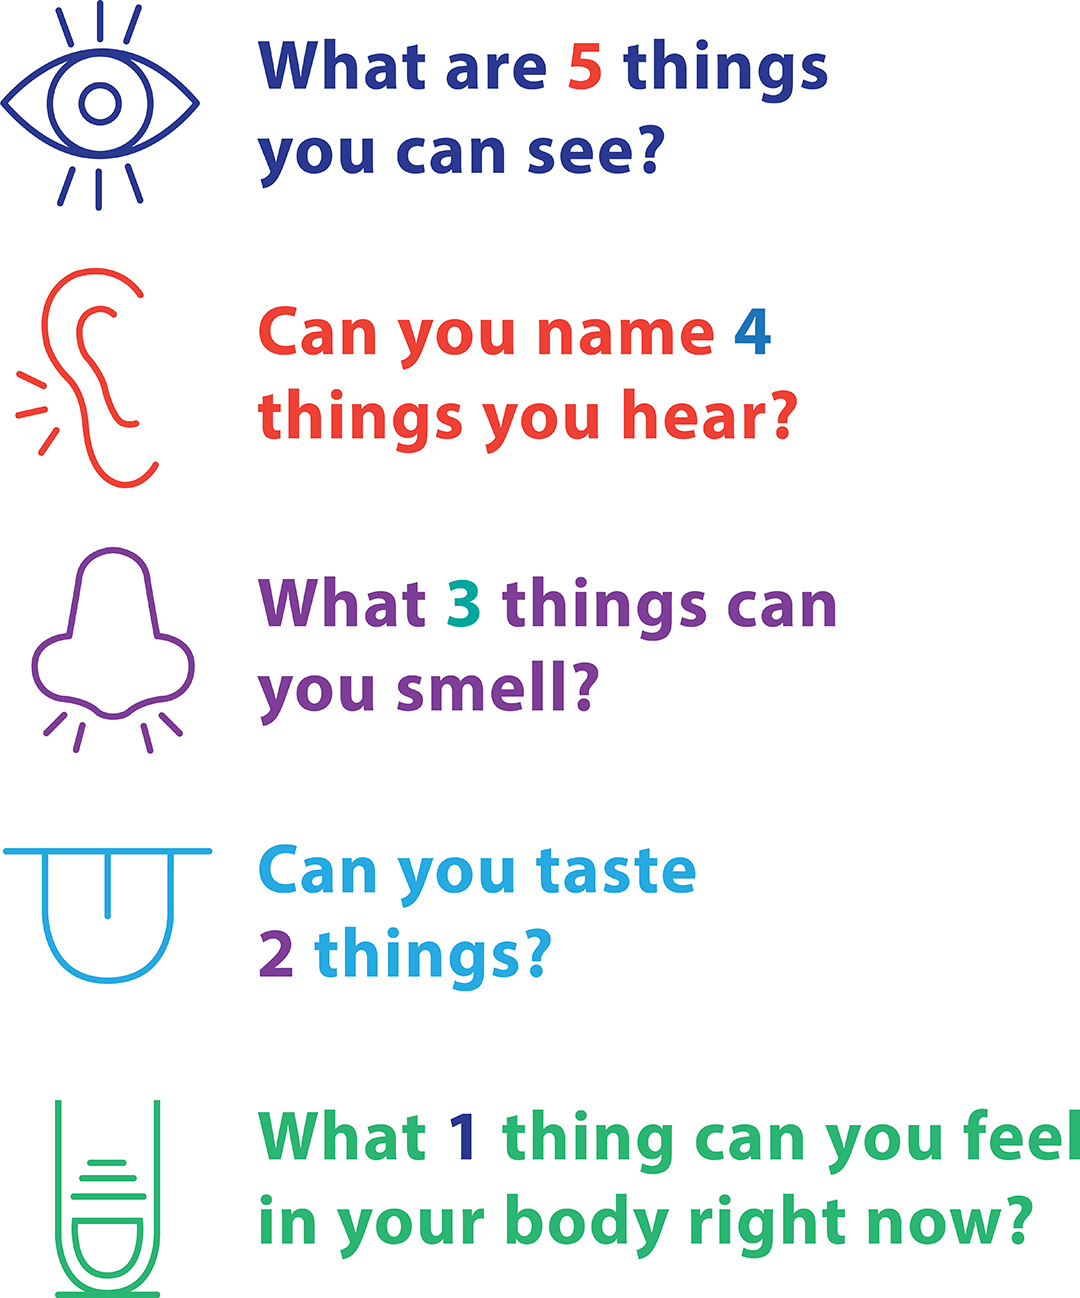 Help children manage stress with the 5 Senses game, from Birthways in Chicago